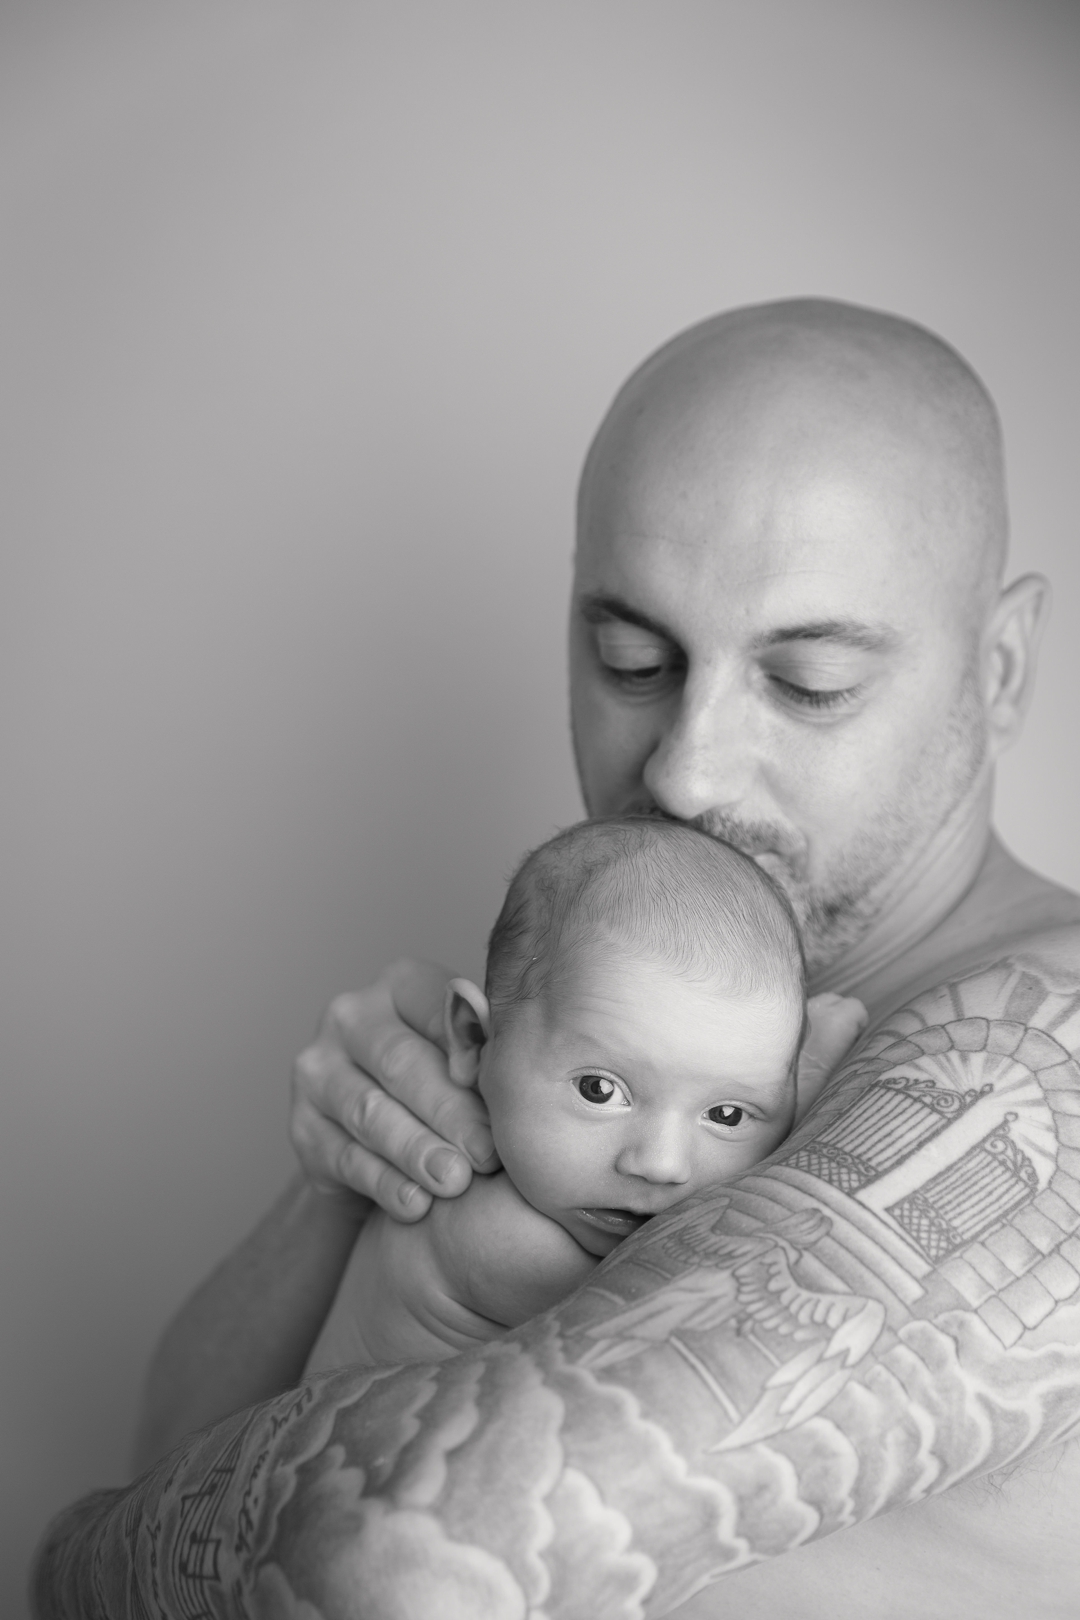 Newborn photography by hayley morris photography - newborn photographer in malvern worcestershire - image shows a new dad with tattoos doing a skin to skin photo holding his newborn baby